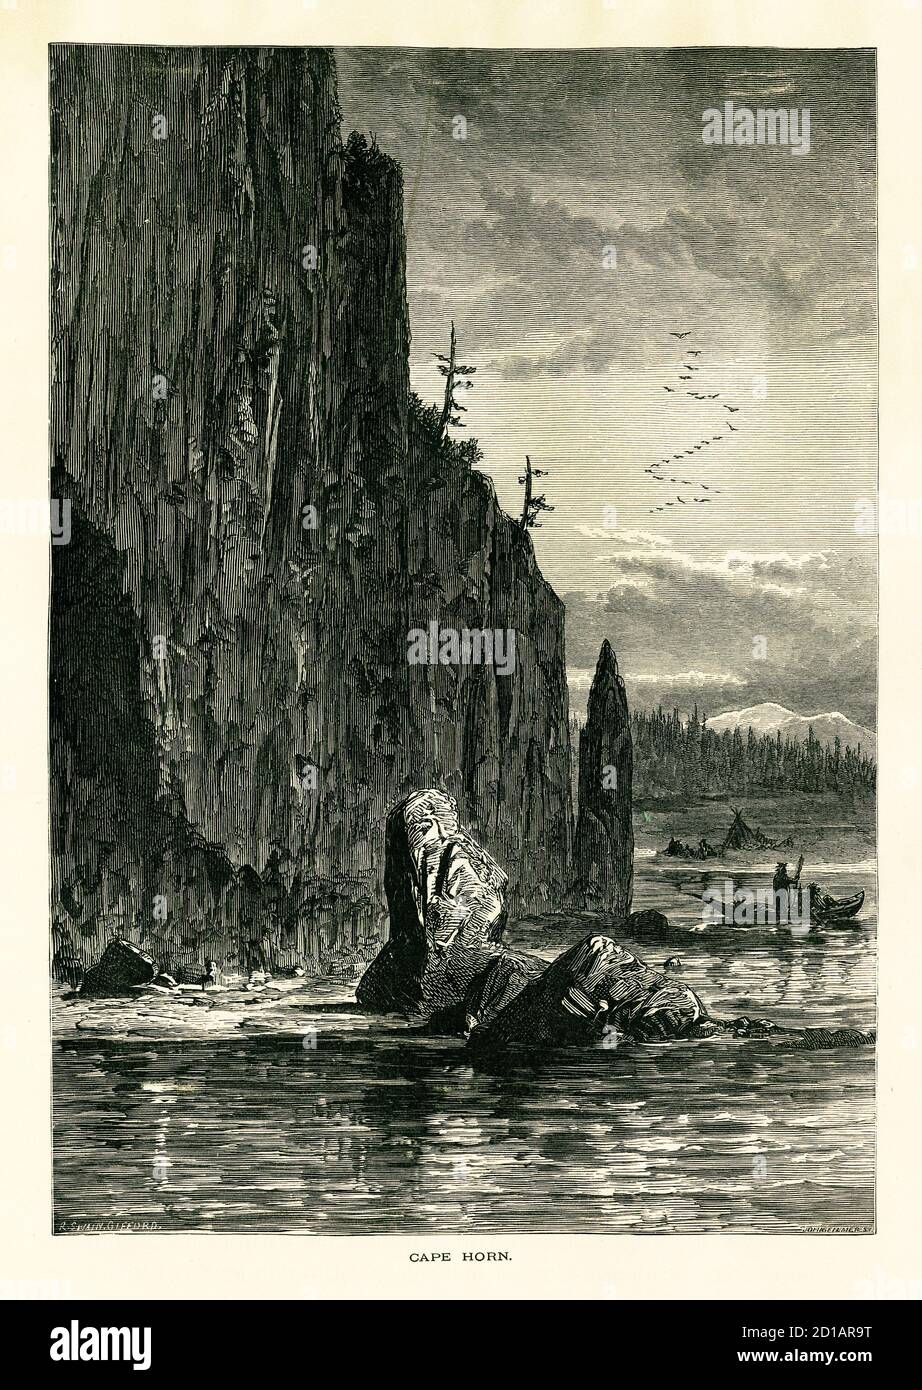 Antique illustration of Cape Horn, the southernmost point of South America. Published in Picturesque America or the Land We Live In (D. Appleton & Co. Stock Photo